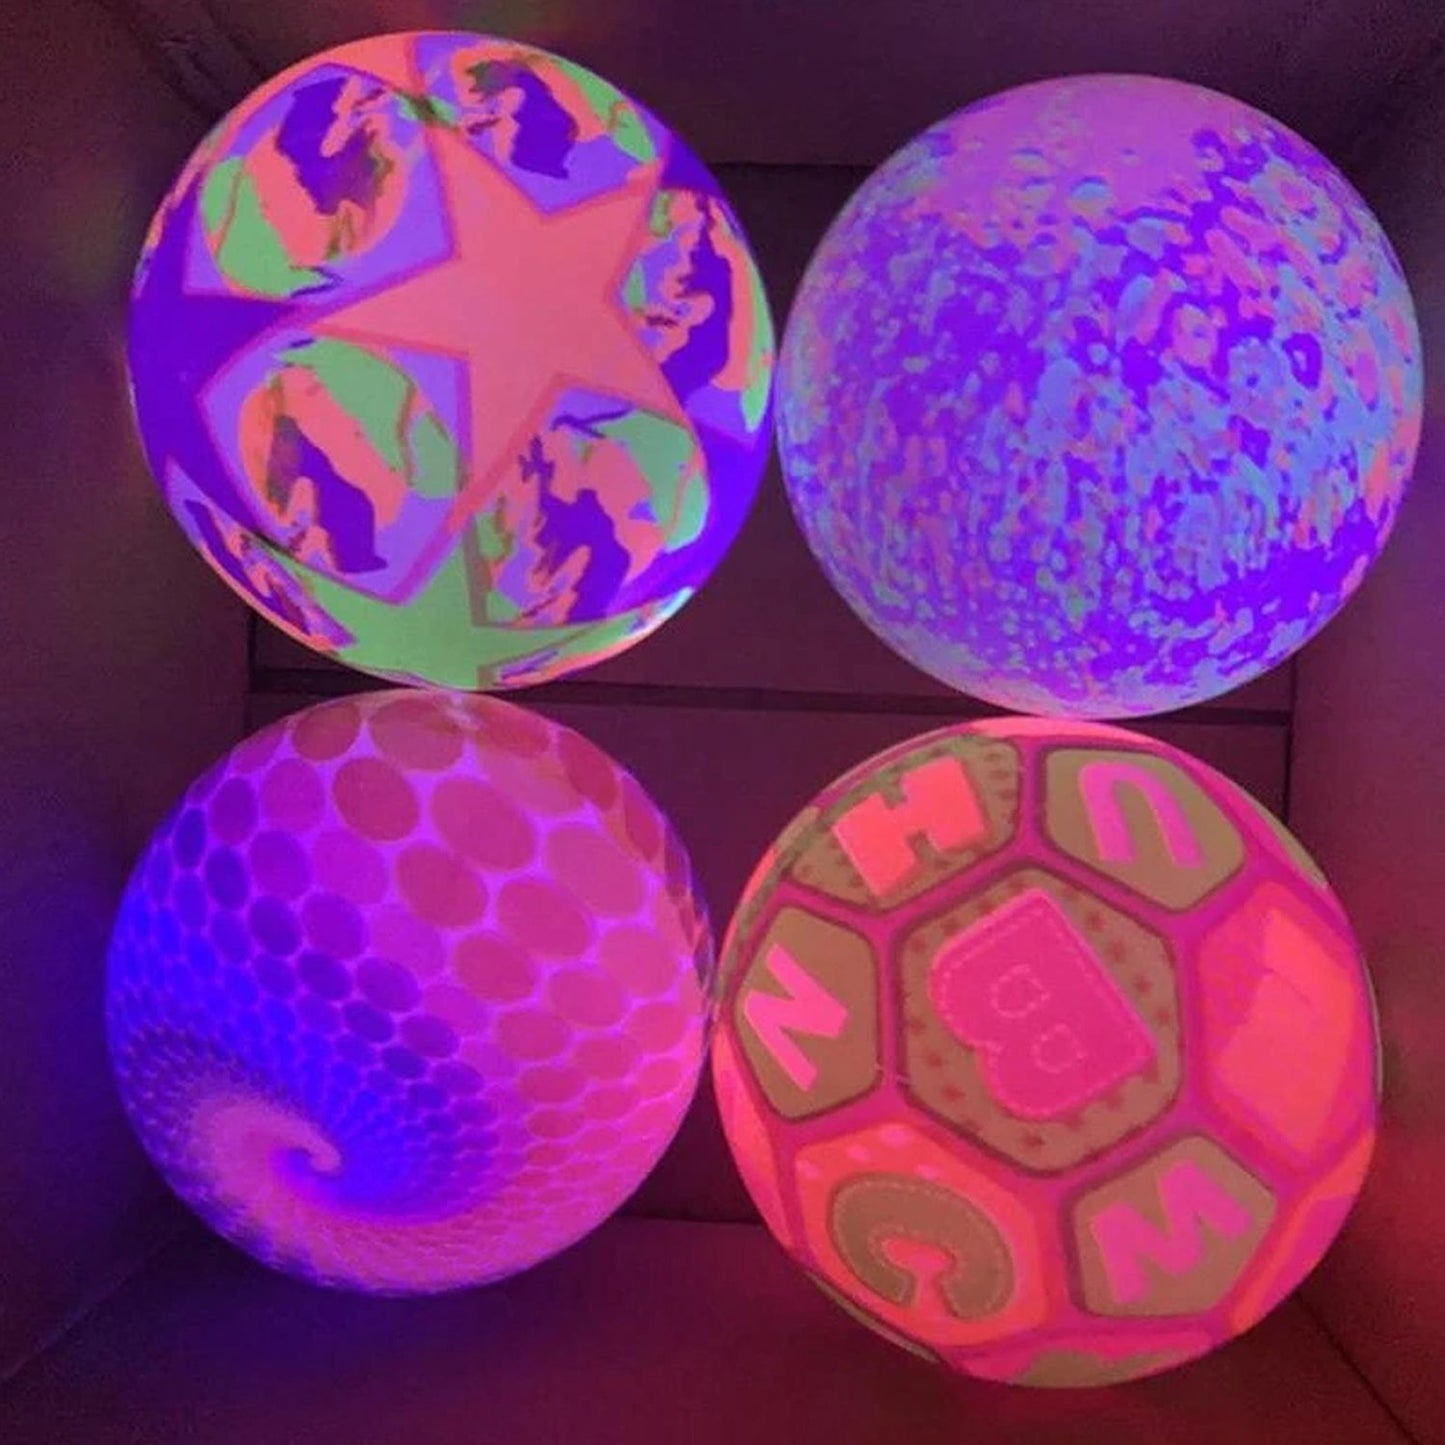 8056 Bouncy Stress Reliever Fun Play Led Rubber Balls for Kids (1Pc Only) 